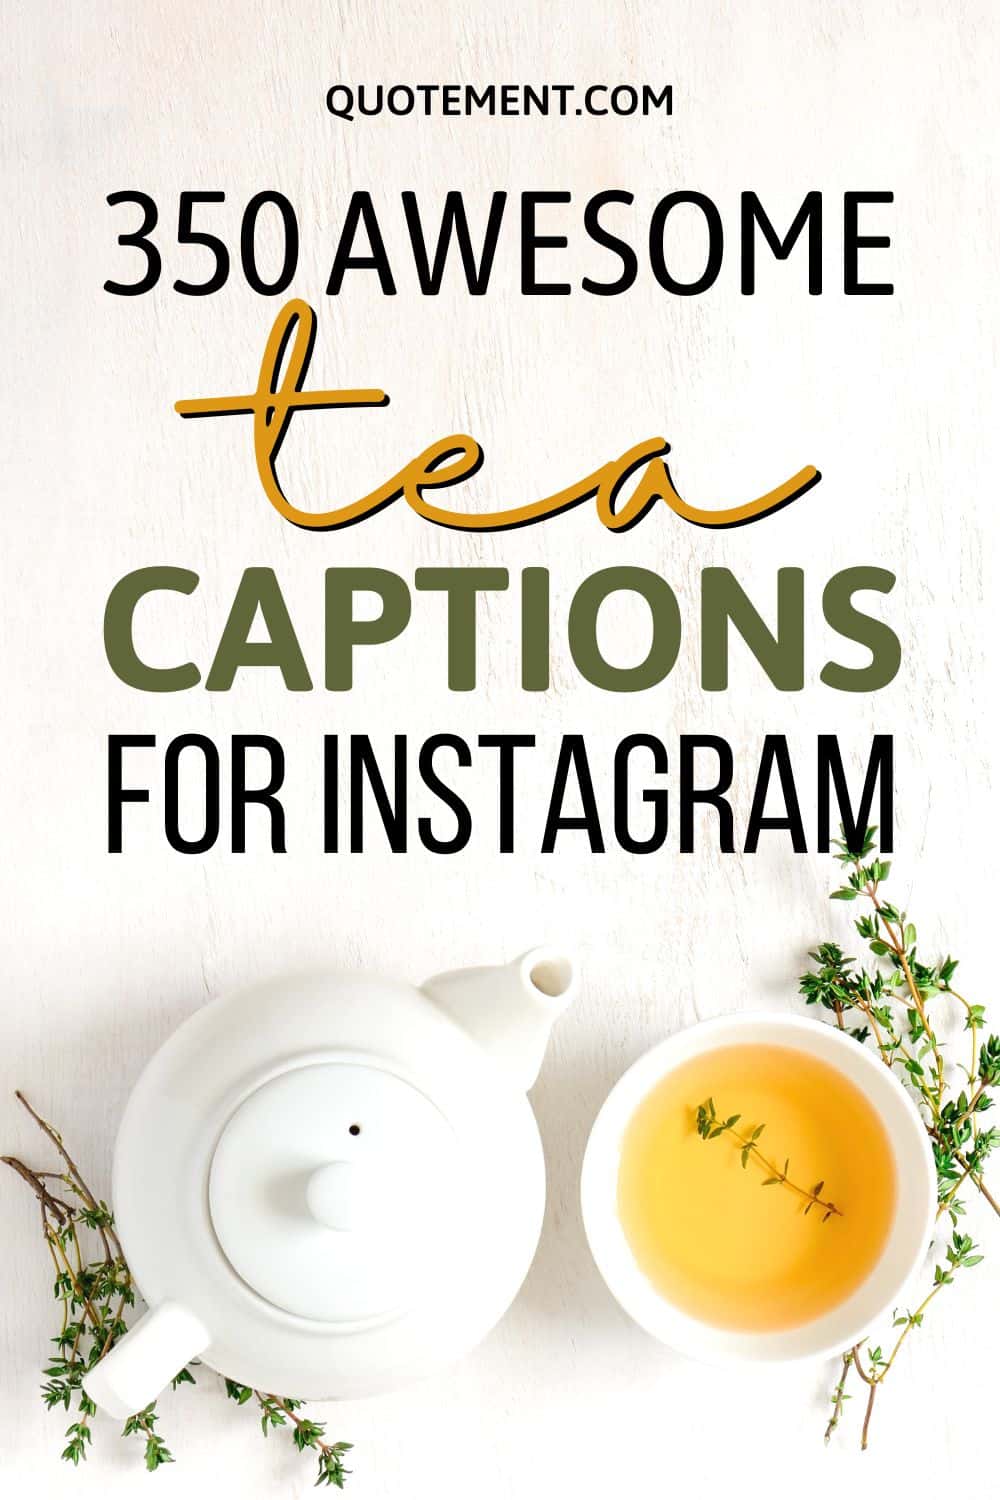 350 Awesome Tea Captions For Instagram For Tea Lovers